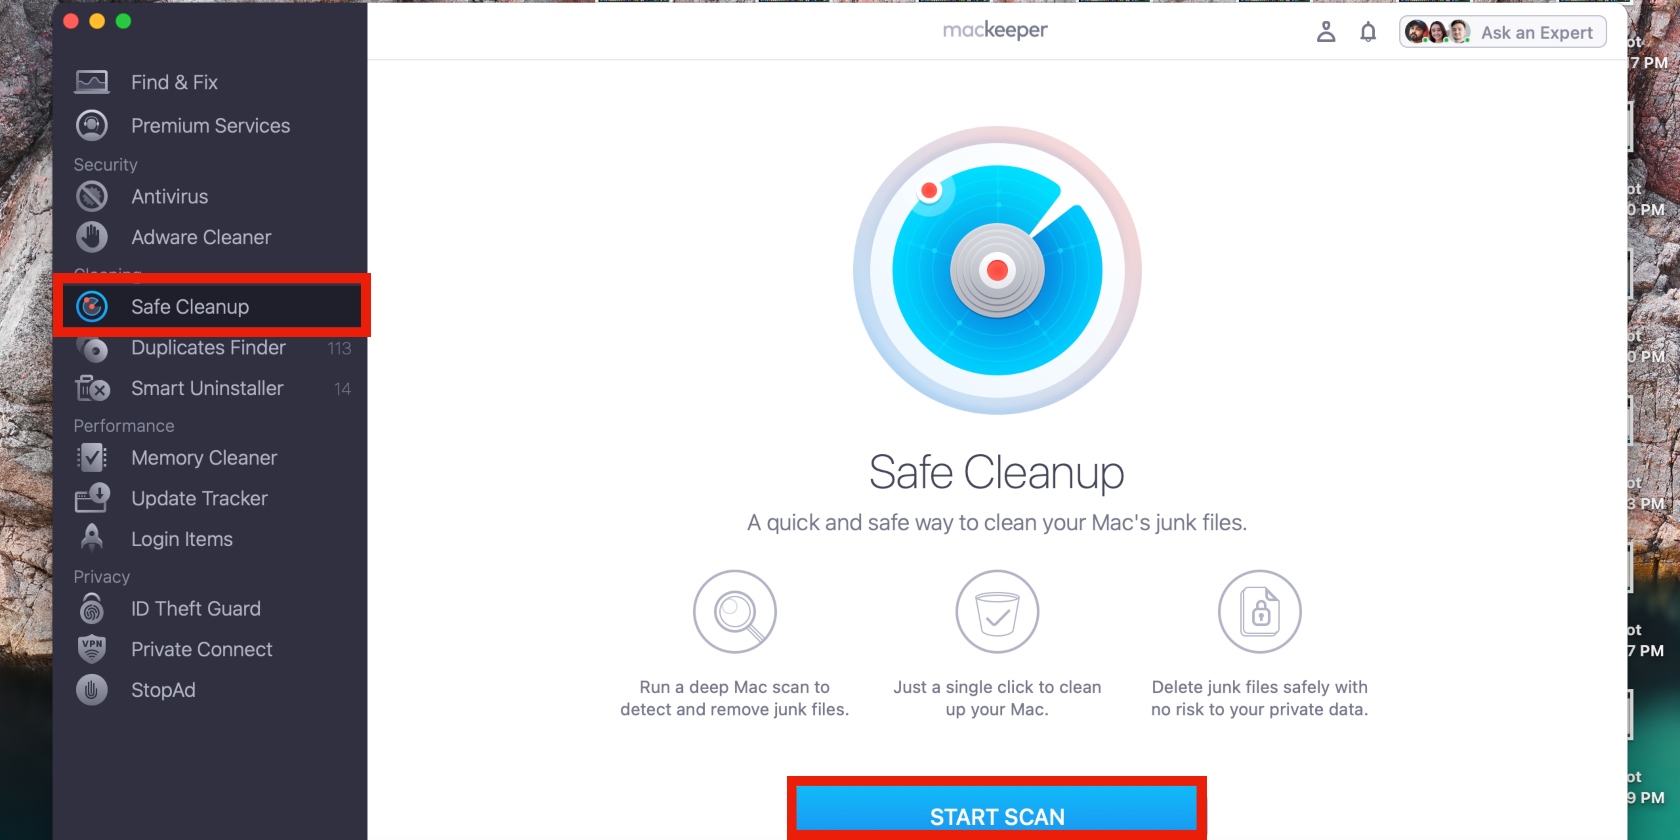 MacKeeper’s Safe Cleanup tool is opened in the MacKeeper app on Mac. The start scan button is outlined in red to get the process started.